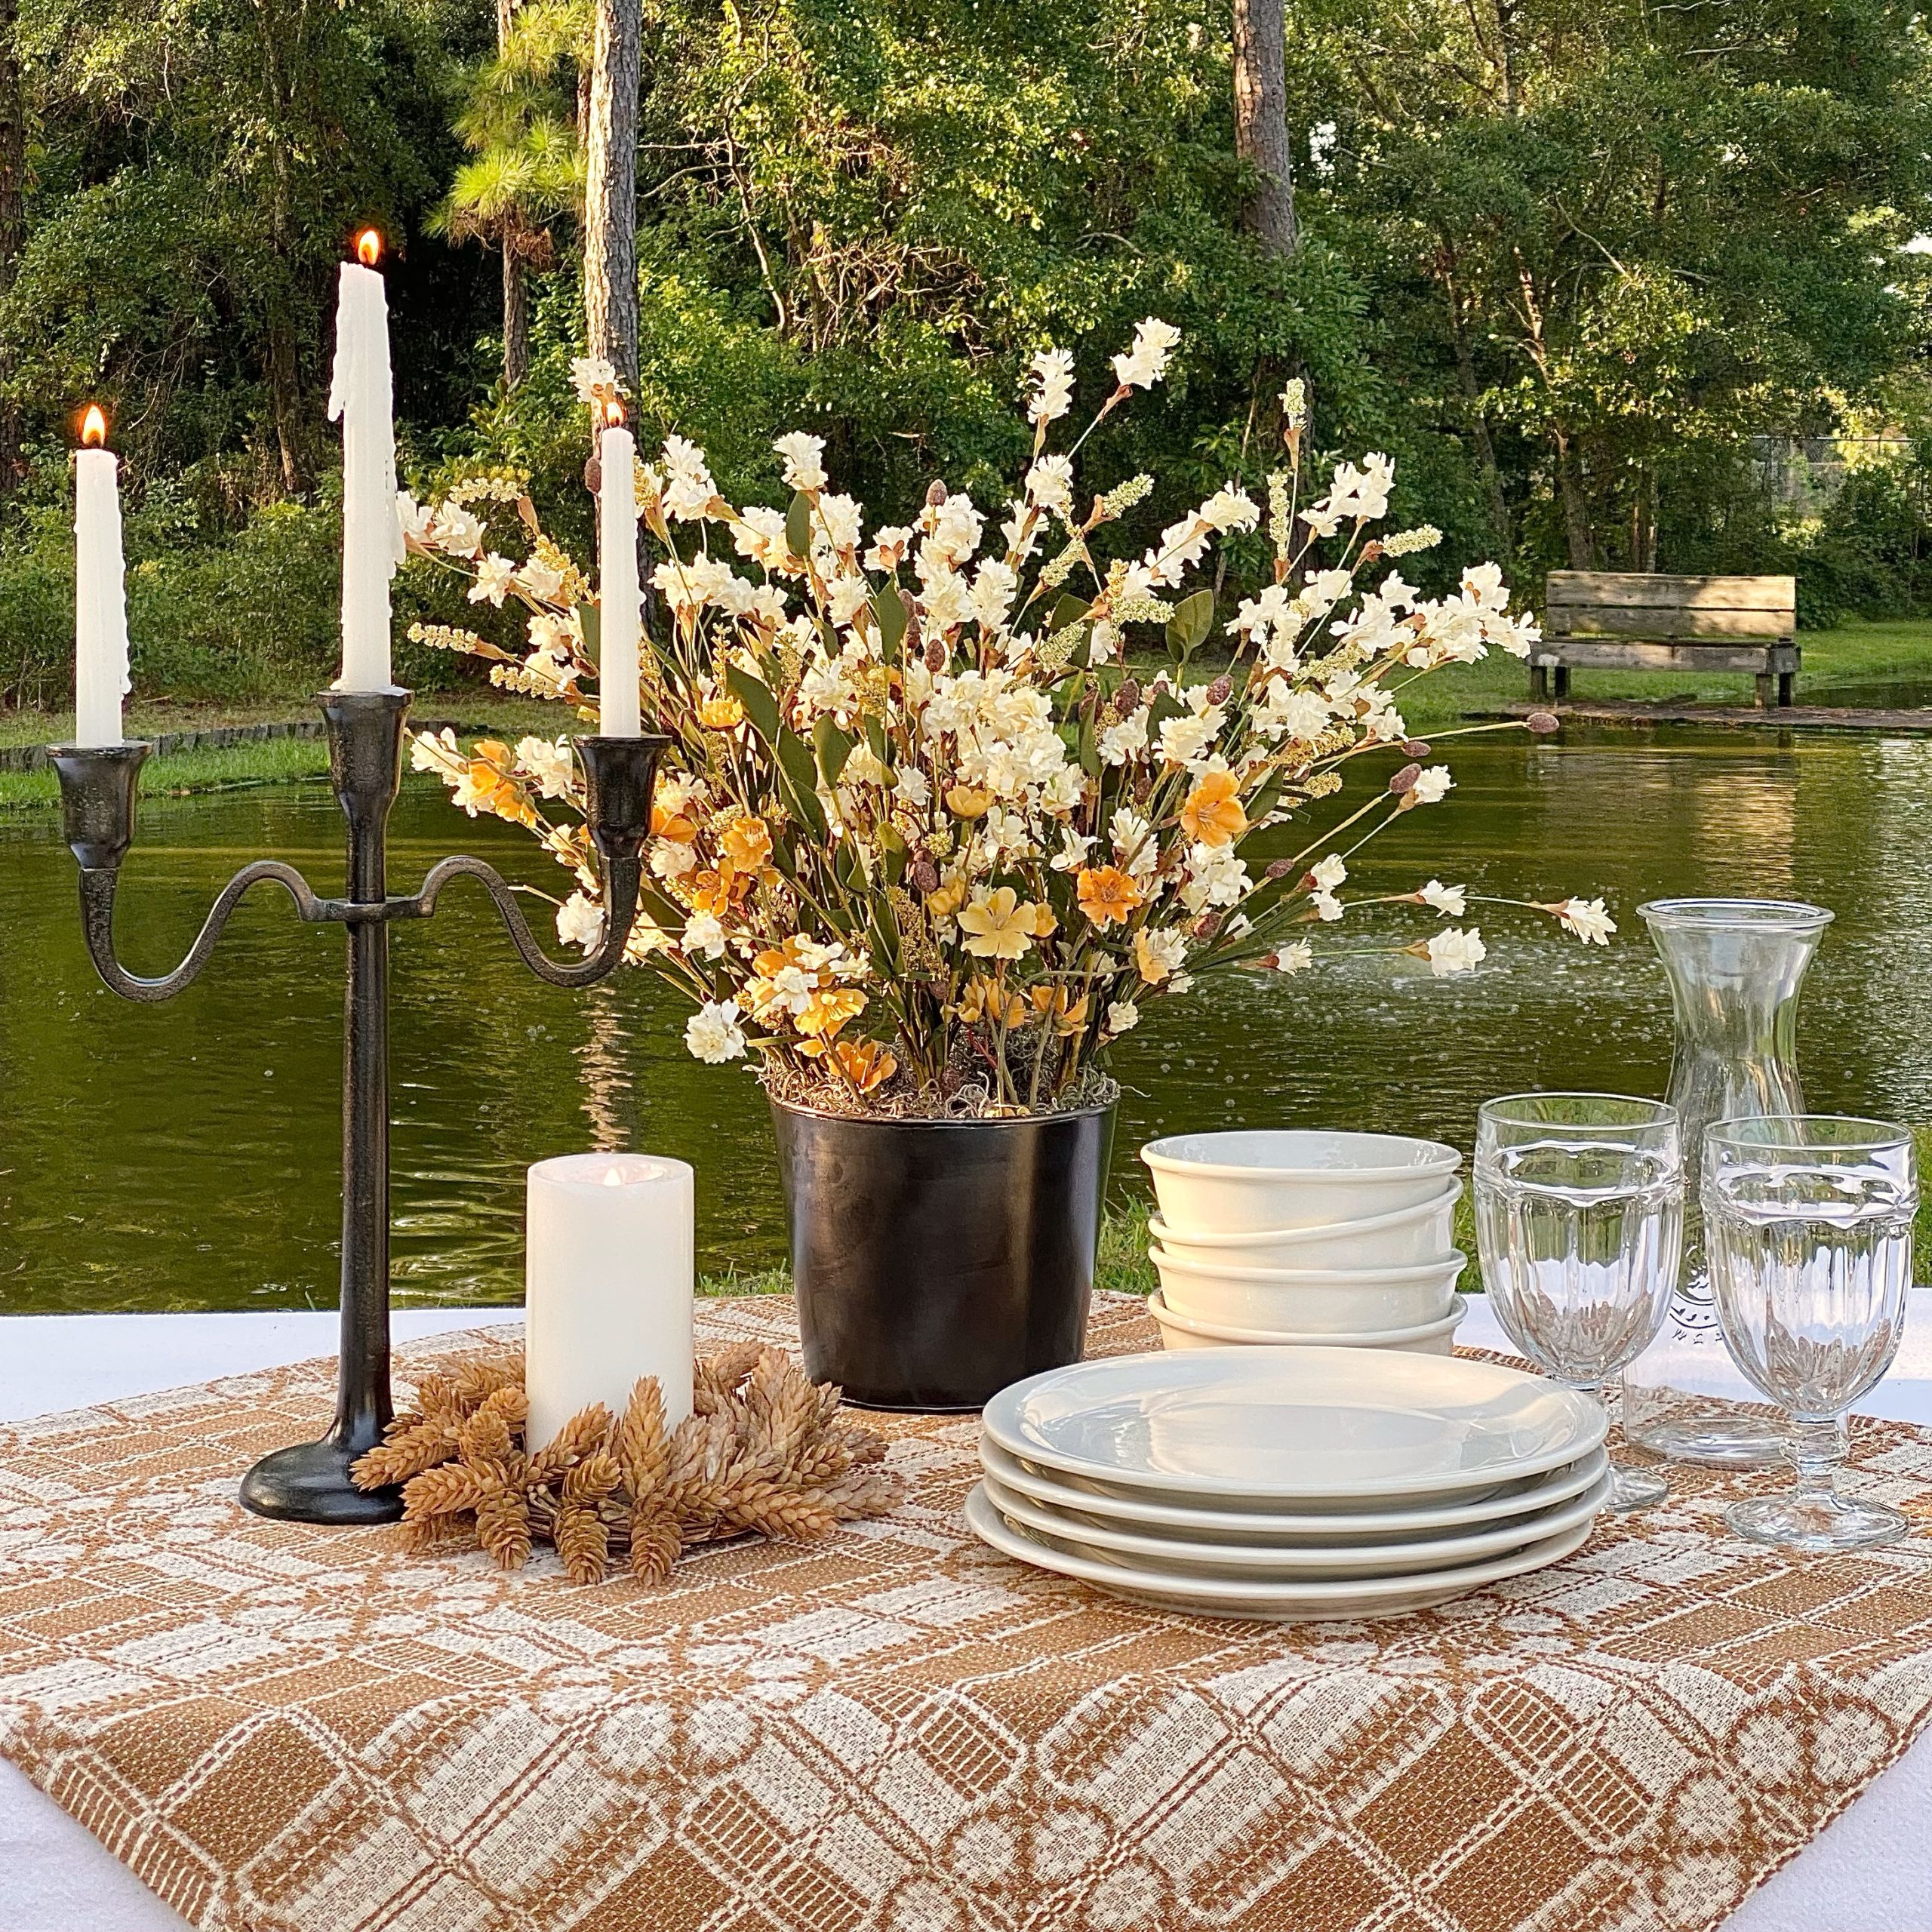 Picnic table by the pond decorated for early Fall with table cloths, candles, fall florals, plates, bowls and glasses.